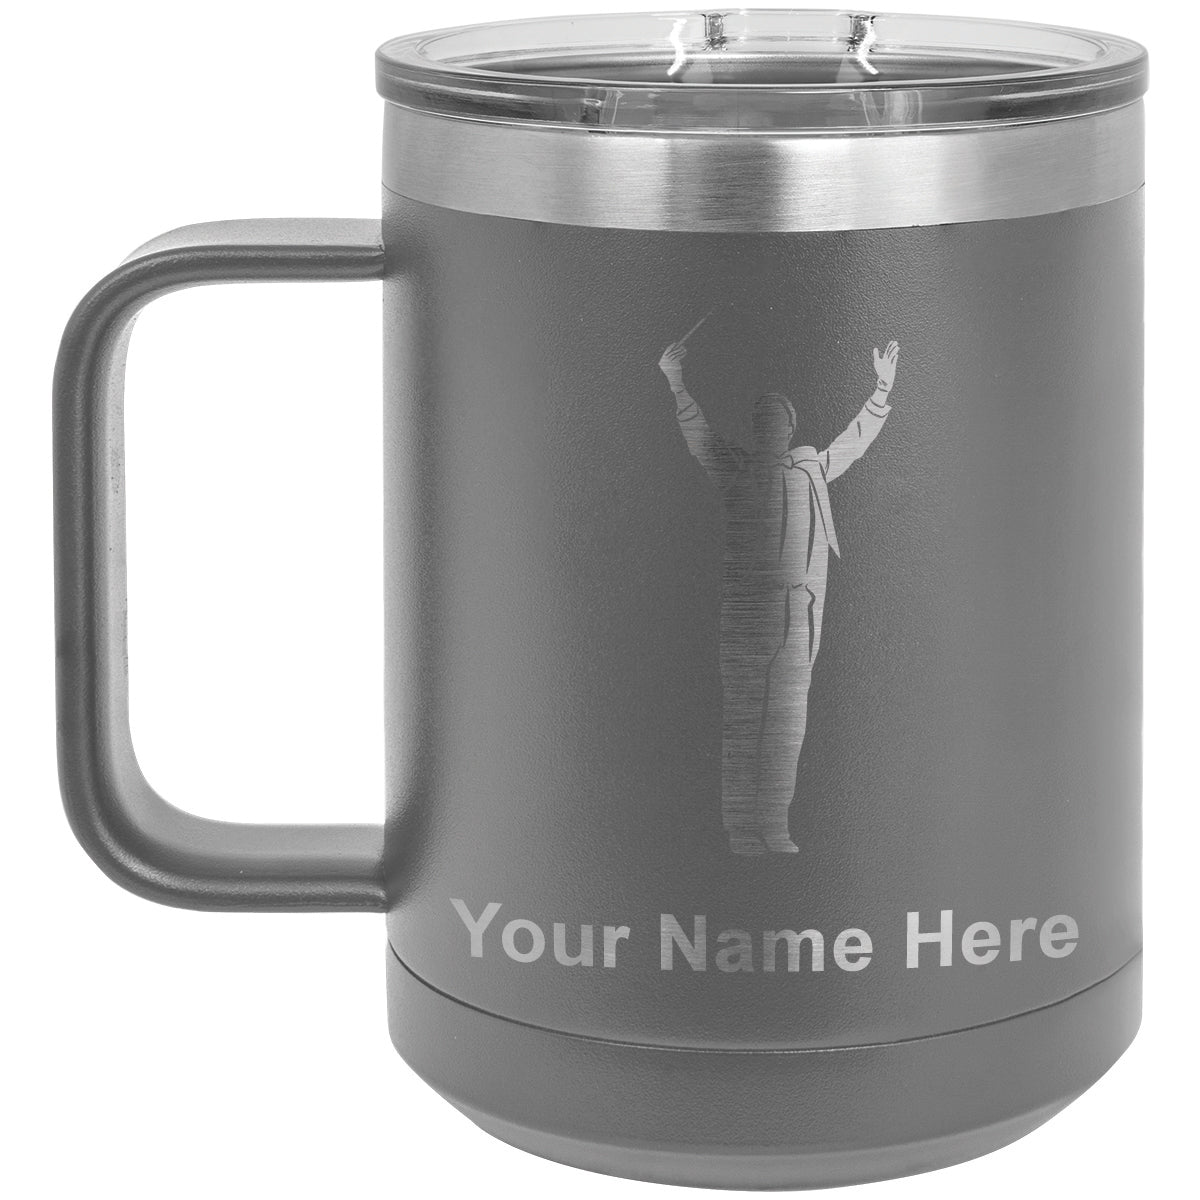 15oz Vacuum Insulated Coffee Mug, Band Director, Personalized Engraving Included